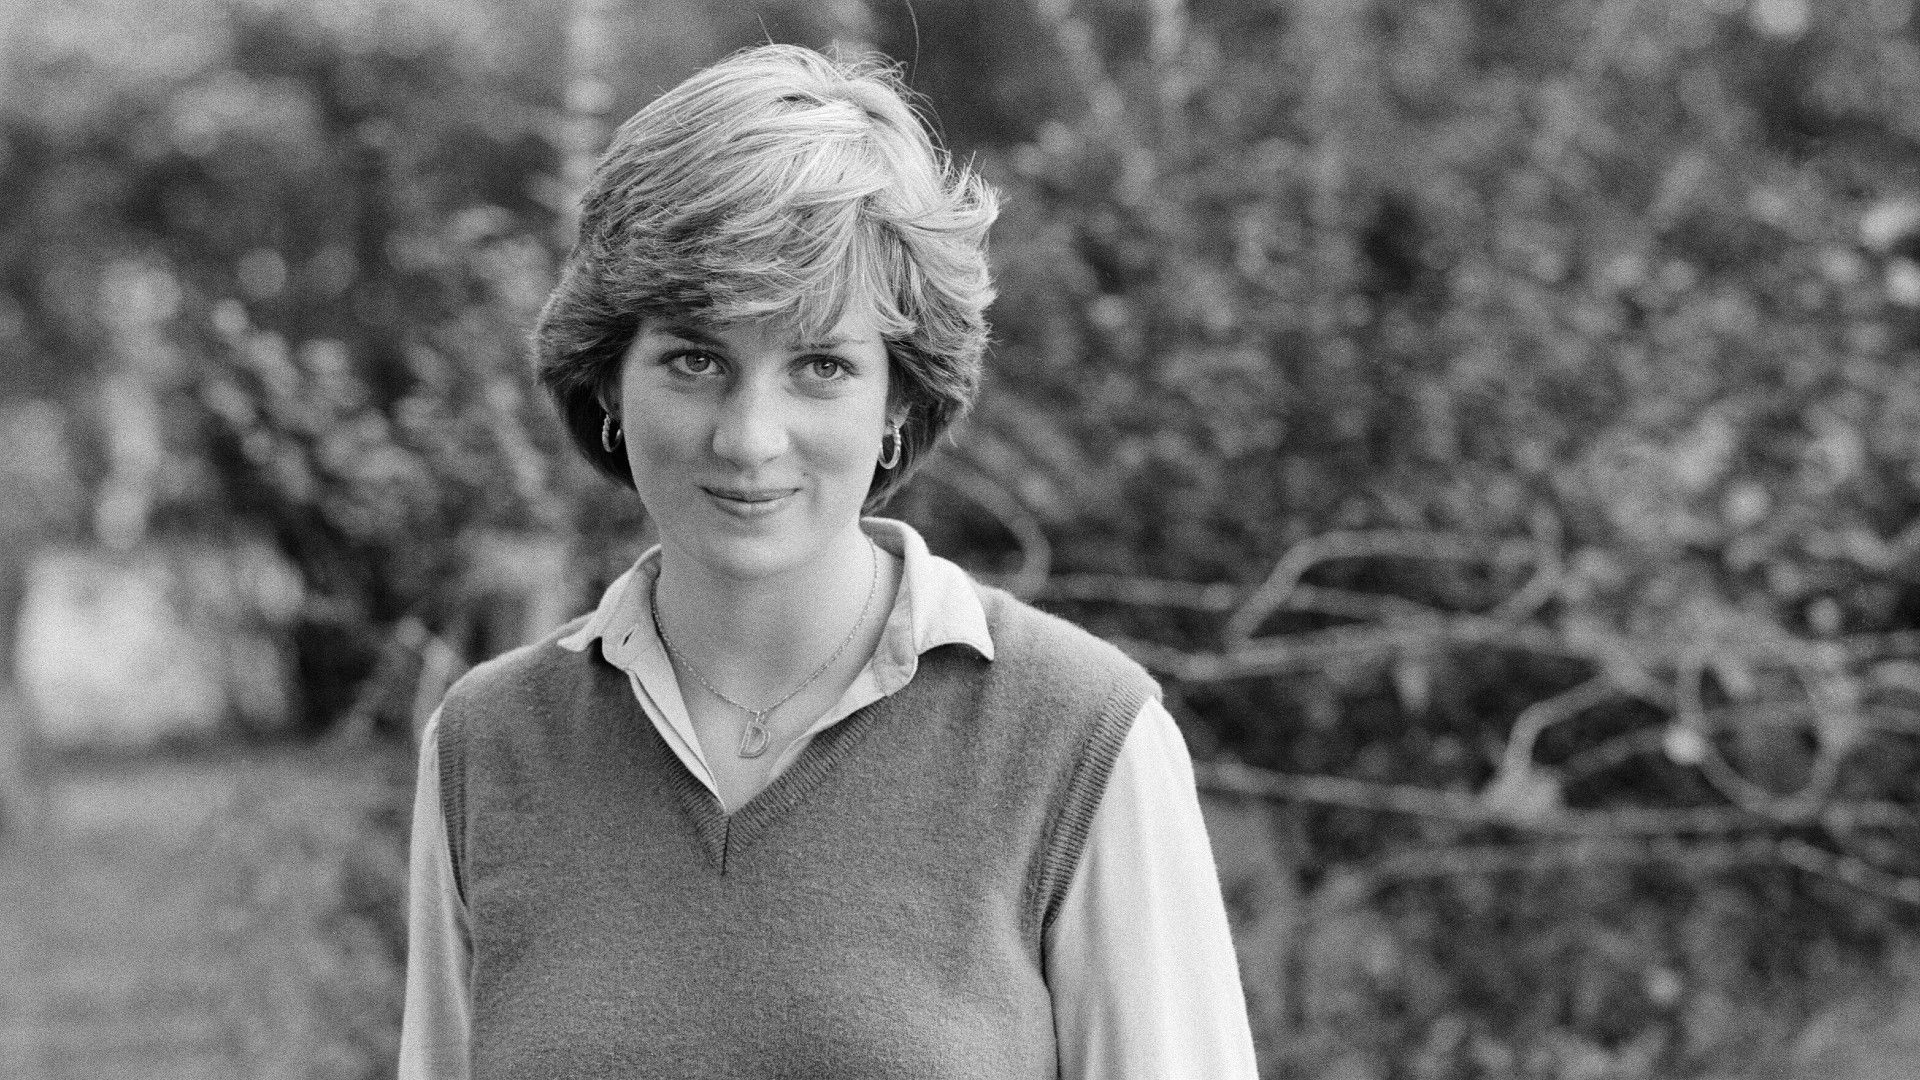 <p>                     Despite the Spencer family’s wealth, Diana actually worked multiple jobs before marrying Charles at the age of 20. She was famously working part-time as a nursery assistant in London when the former couple met.                   </p>                                      <p>                     Alongside her role at the nursery, she also worked three days a week as a private nanny to an American family in London. It's said that she handed her notice in just a couple of months before walking down the aisle to become the Princess of Wales. In her capacity as a private nanny, she looked after the couple’s toddler, Patrick Robertson, performing typical household duties such as washing up, picking up toys, and feeding and playing with Patrick.                   </p>